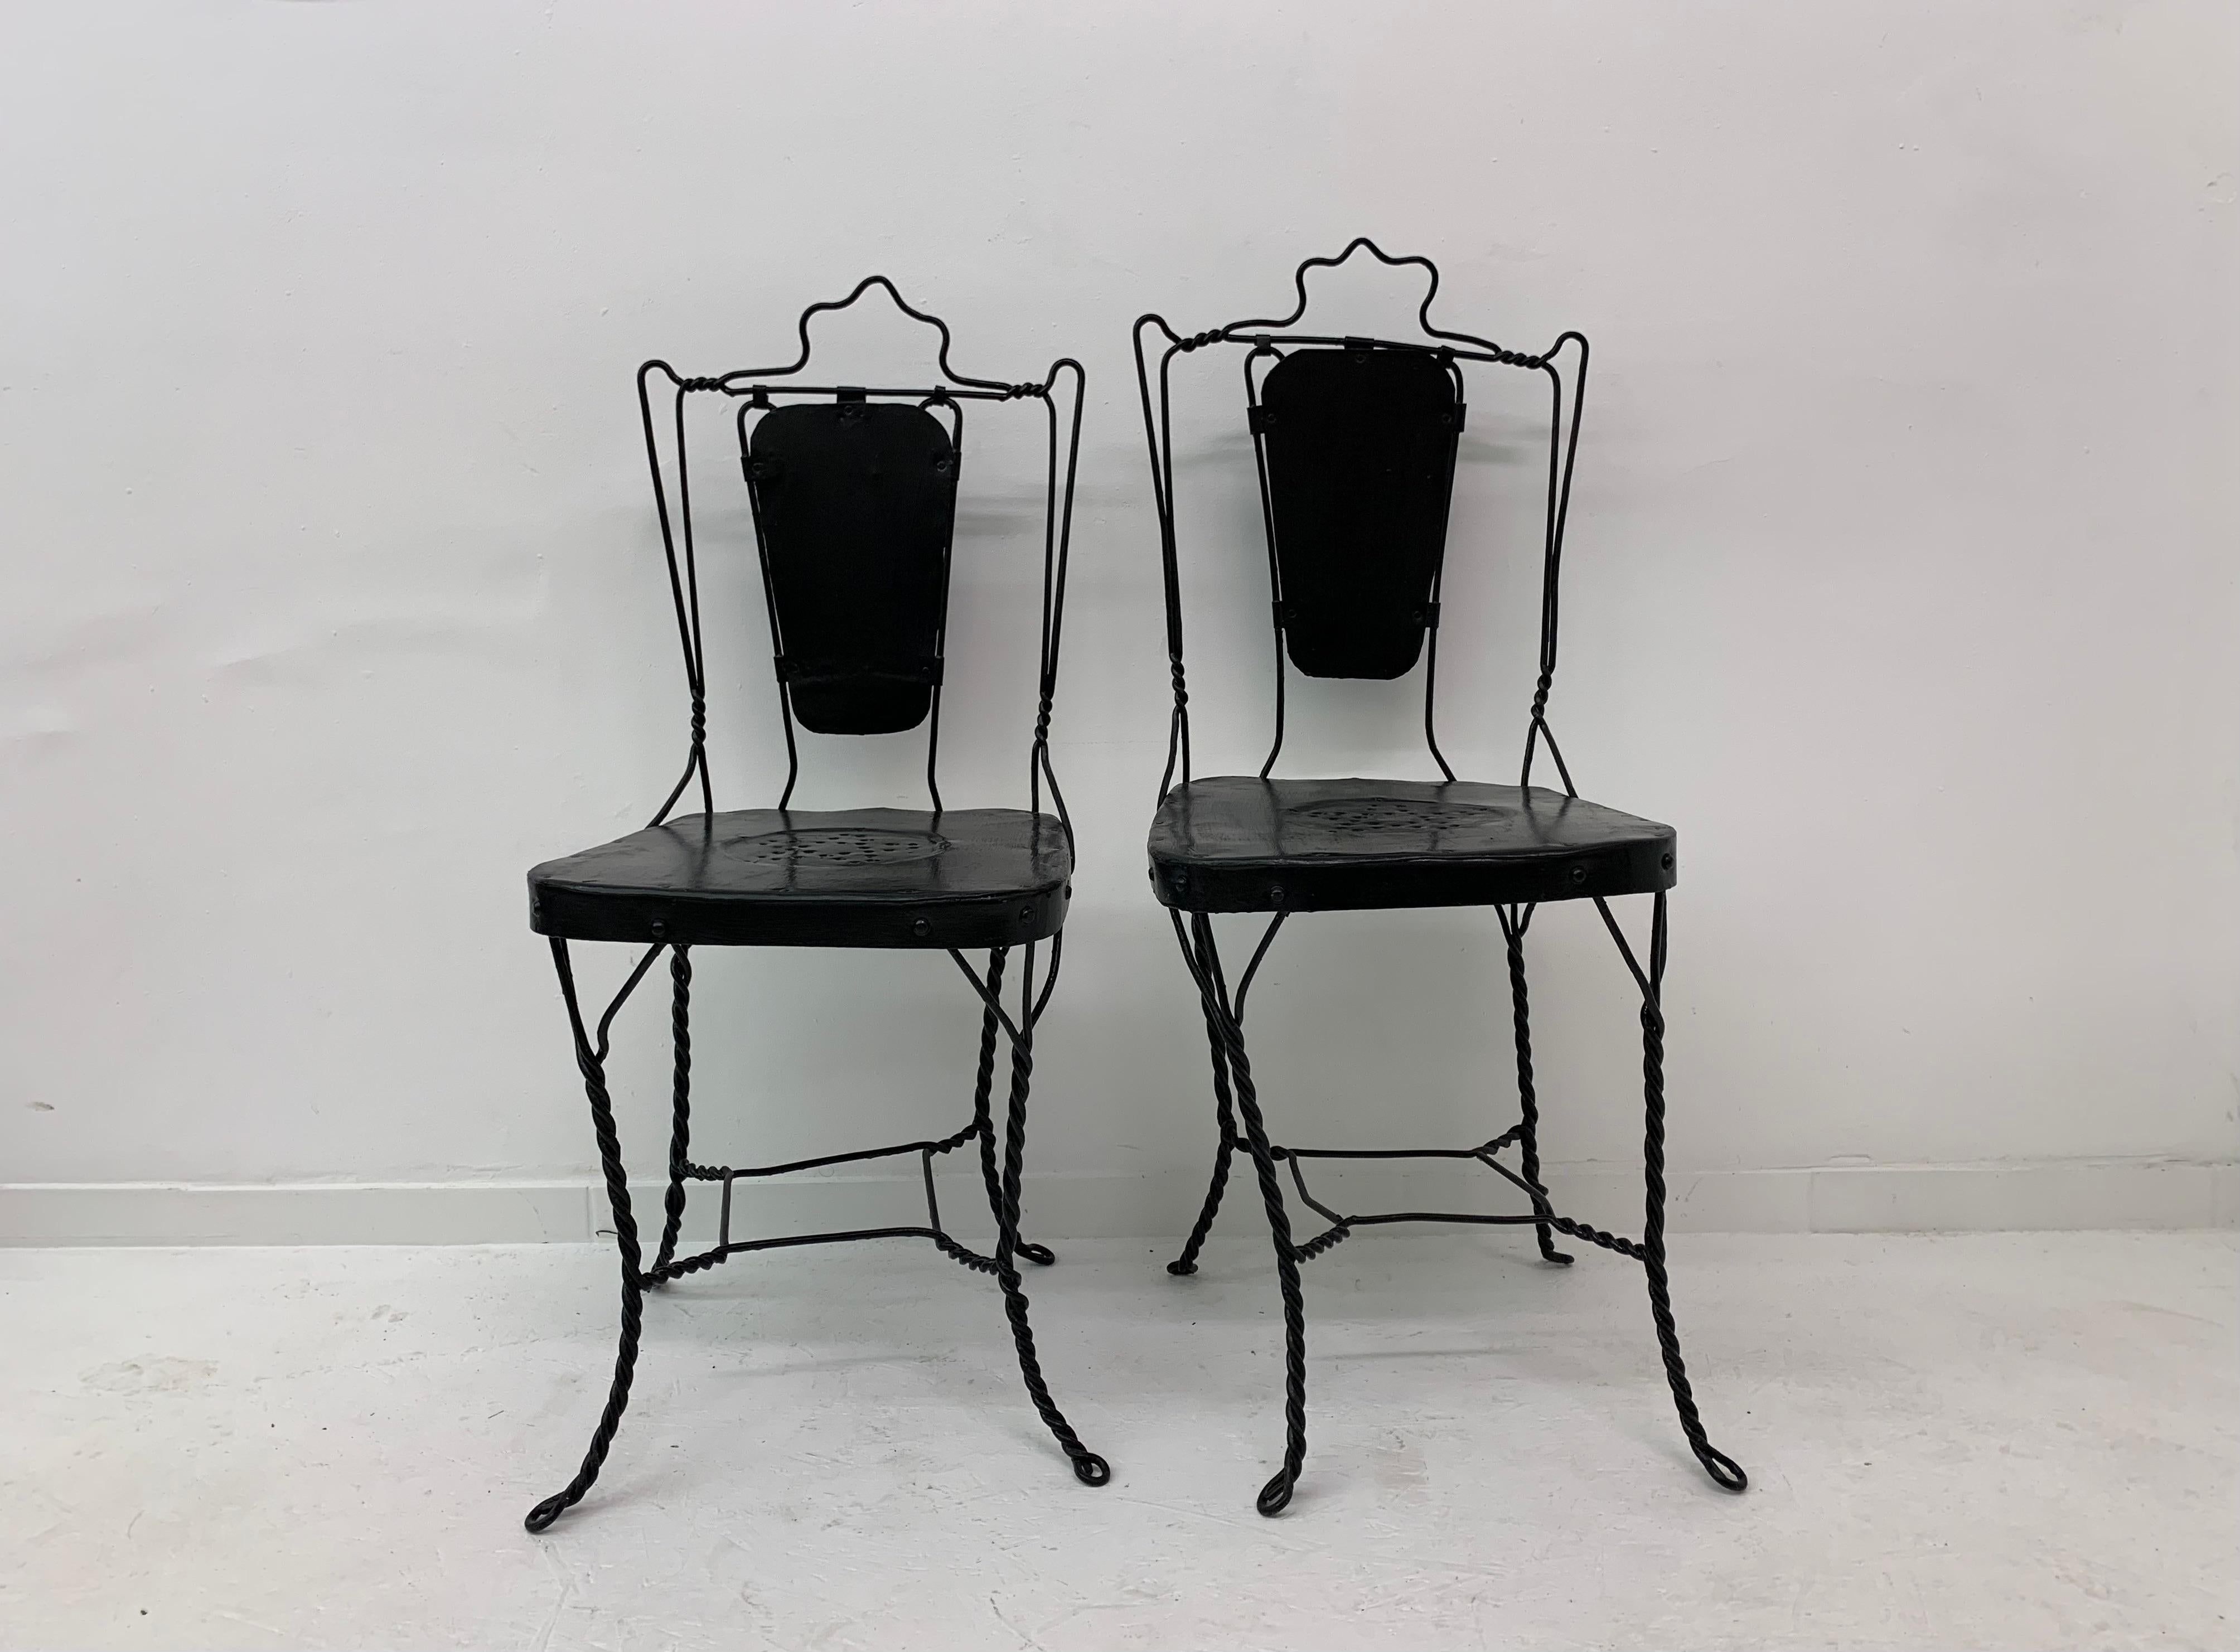 These chairs, made of twisted steel wire, used to be at american ice cream parlors.
Conditon: Good painted black.
Dimensions: 45-48cm H seat,38,5cm W, 95-92cm H total, 39 cm D.